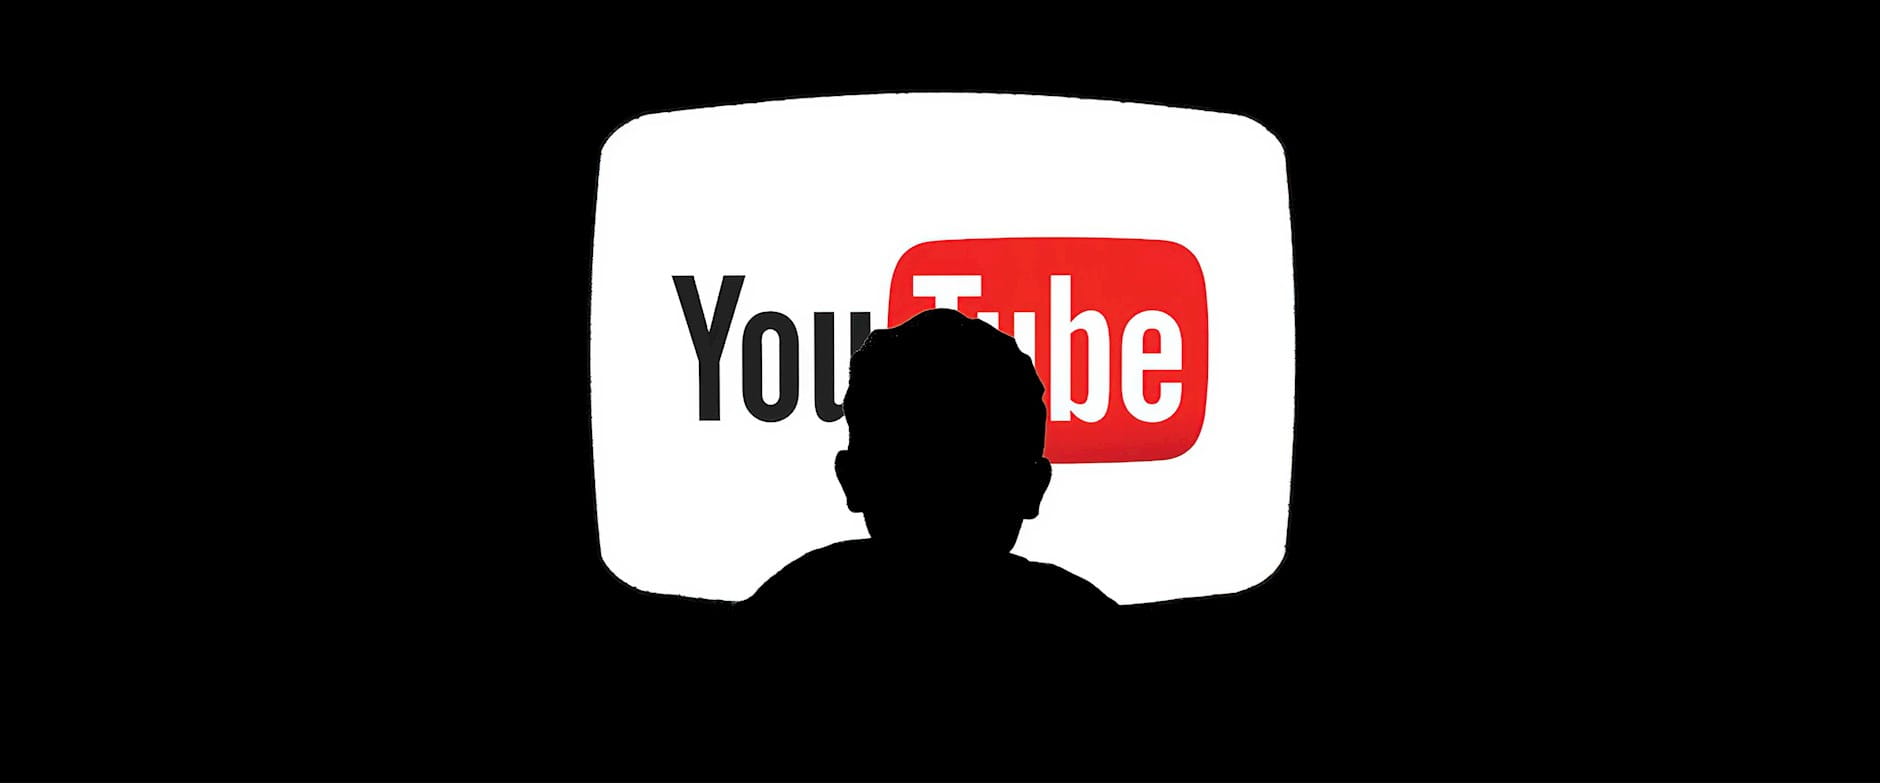 Silhouette of person in front of YouTube